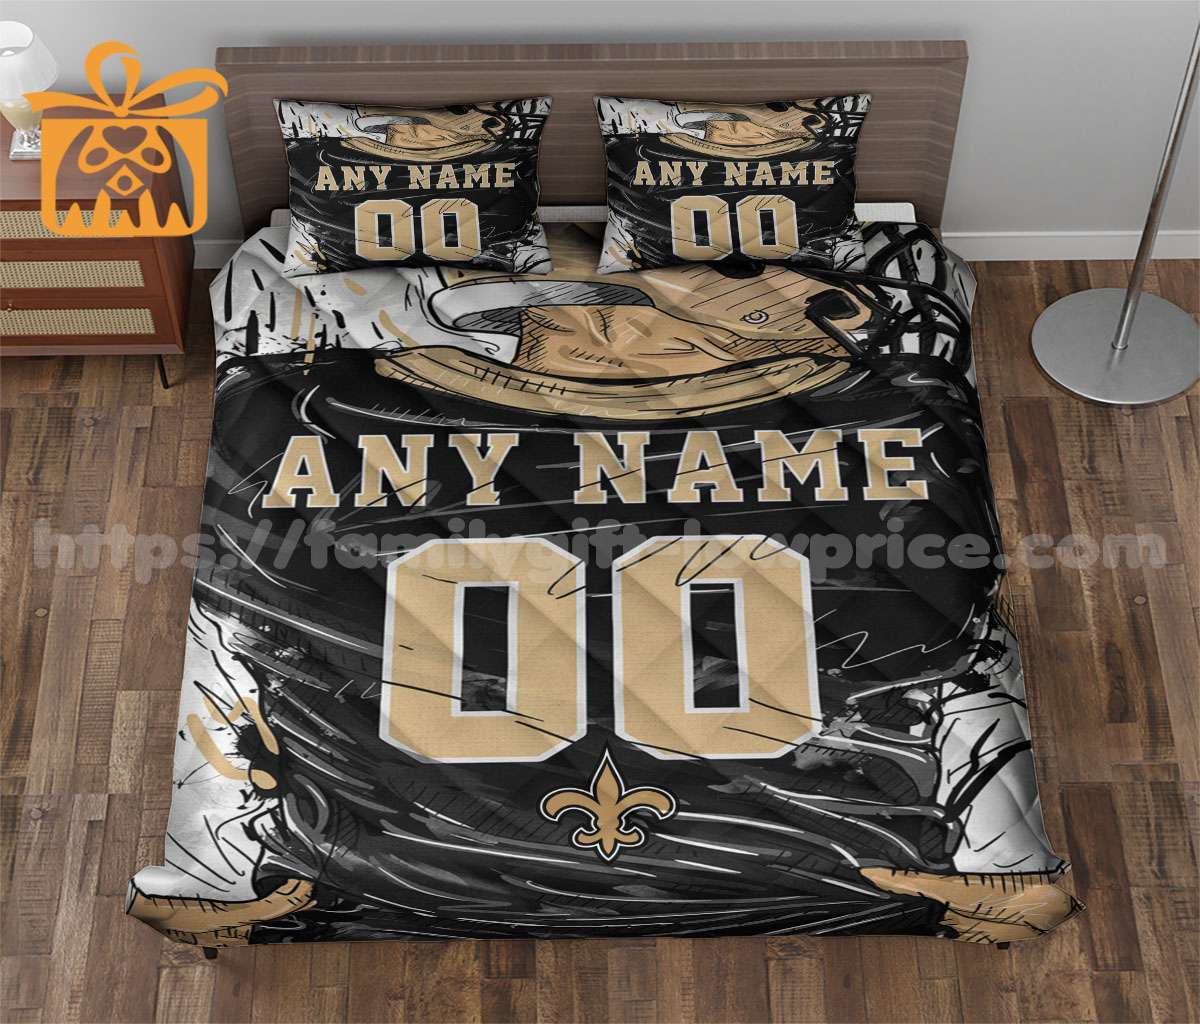 New Orleans Saints Jersey Quilt Bedding Sets, Saints Football Gifts, Personalized NFL Jerseys with Your Name & Number